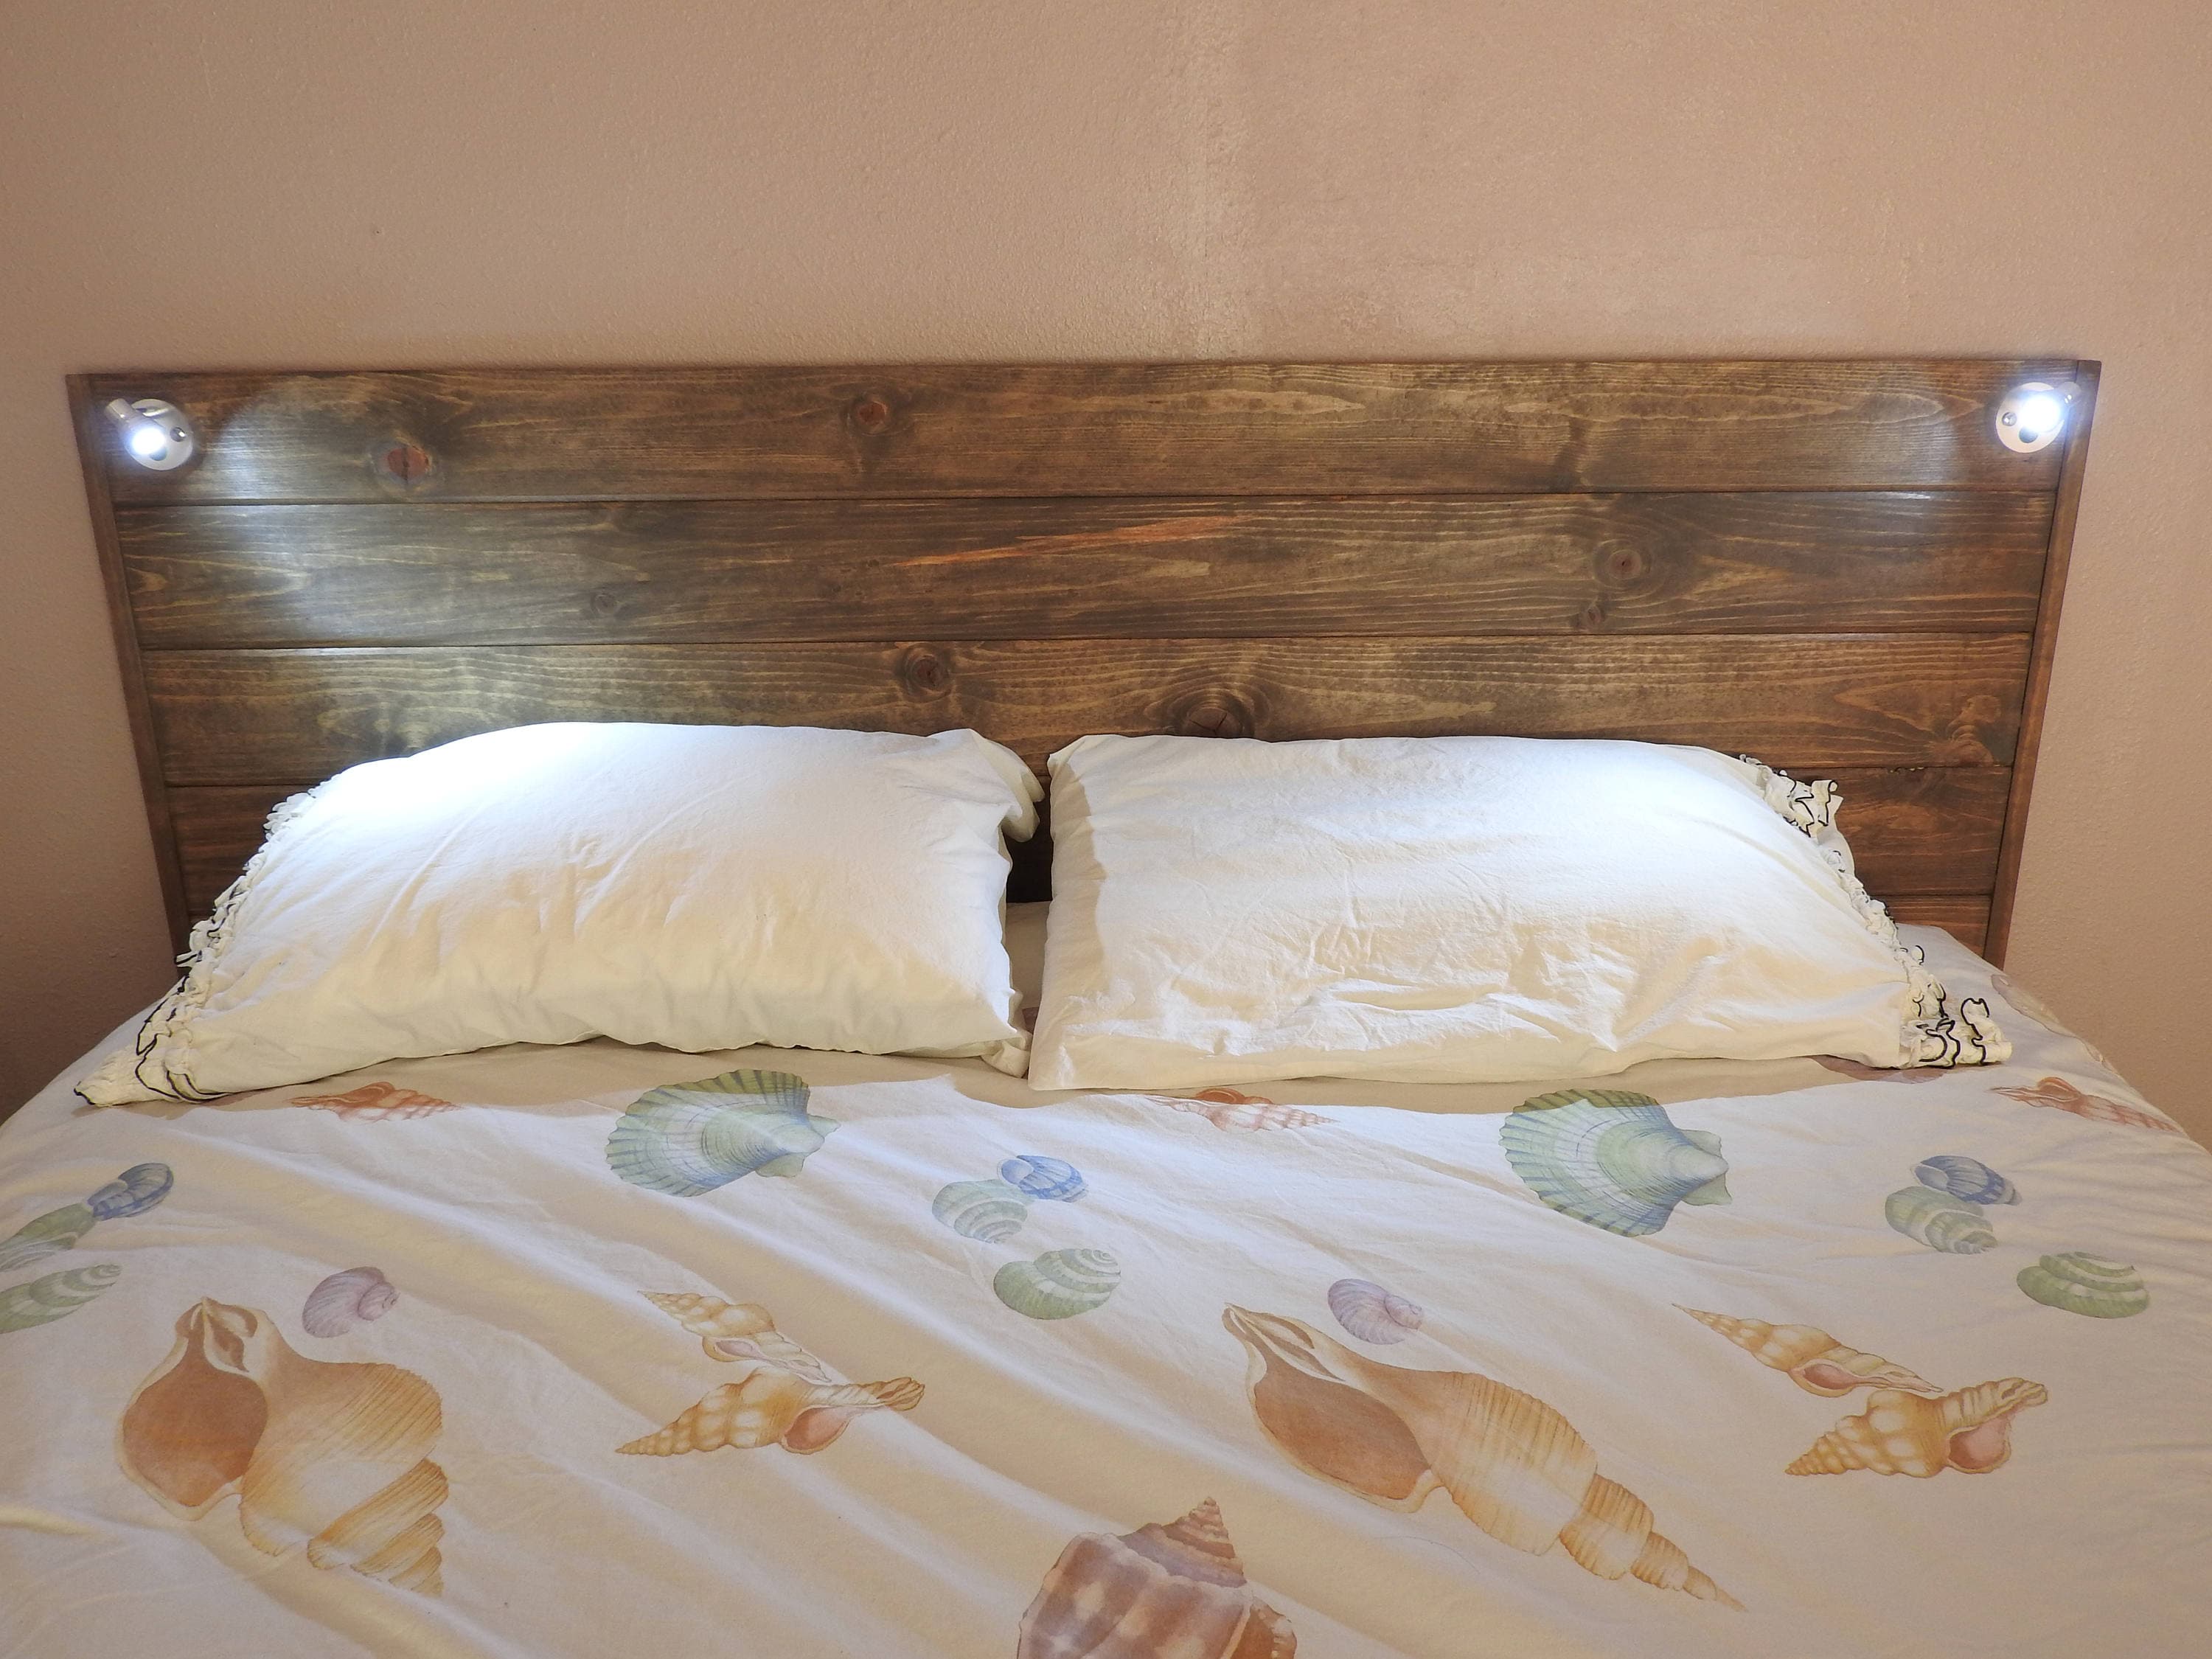 PLANO Headboard Made From Salvaged Blue Stain bettle Kill -